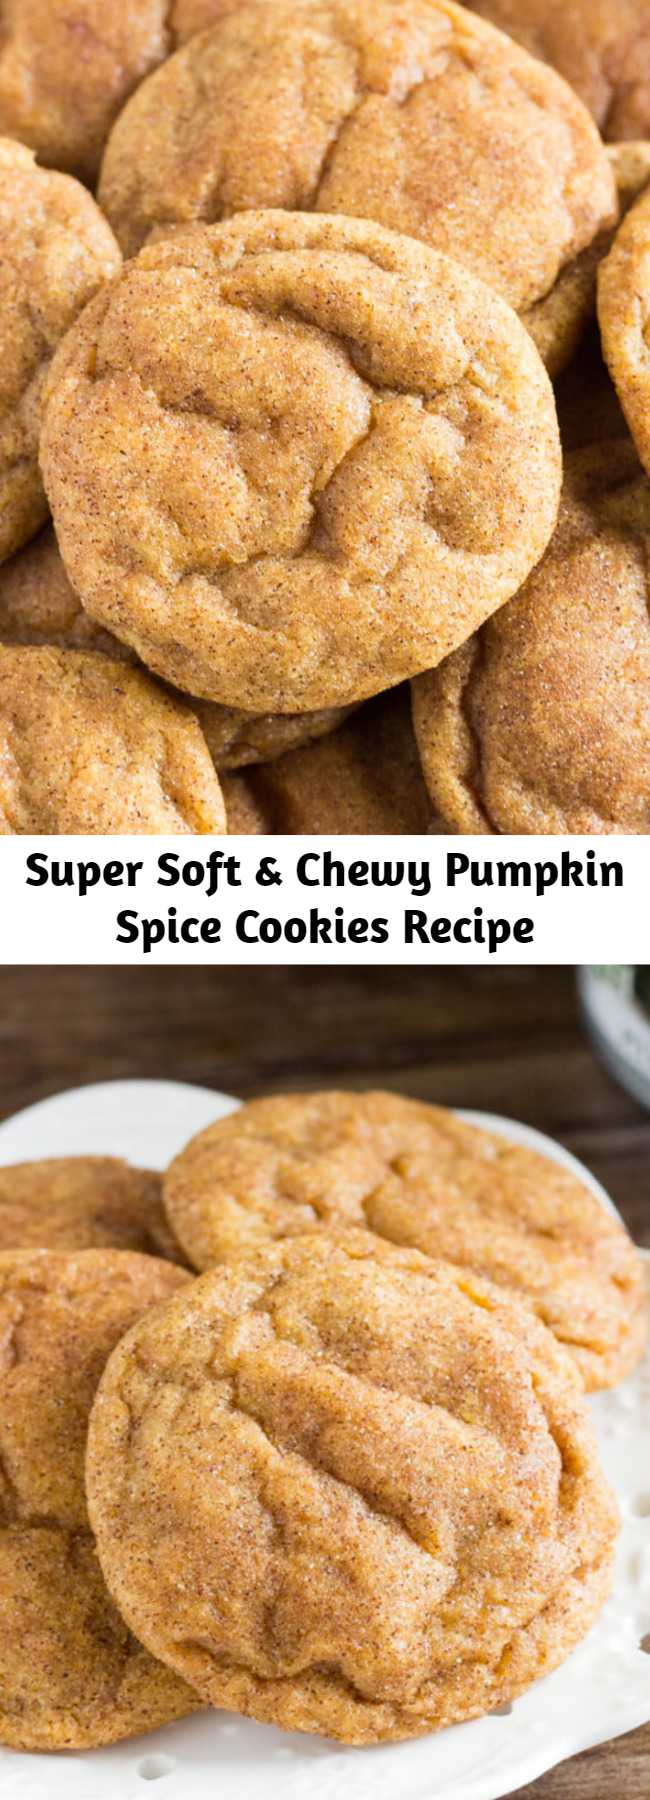 Super Soft & Chewy Pumpkin Spice Cookies Recipe - These pumpkin spice cookies are soft, chewy and perfect for fall. They’re filled with flavor thanks to the pumpkin, vanilla extract, & fall spices. Then they’re rolled in cinnamon sugar for a delicious coating that’ll remind you of snickerdoodles. 